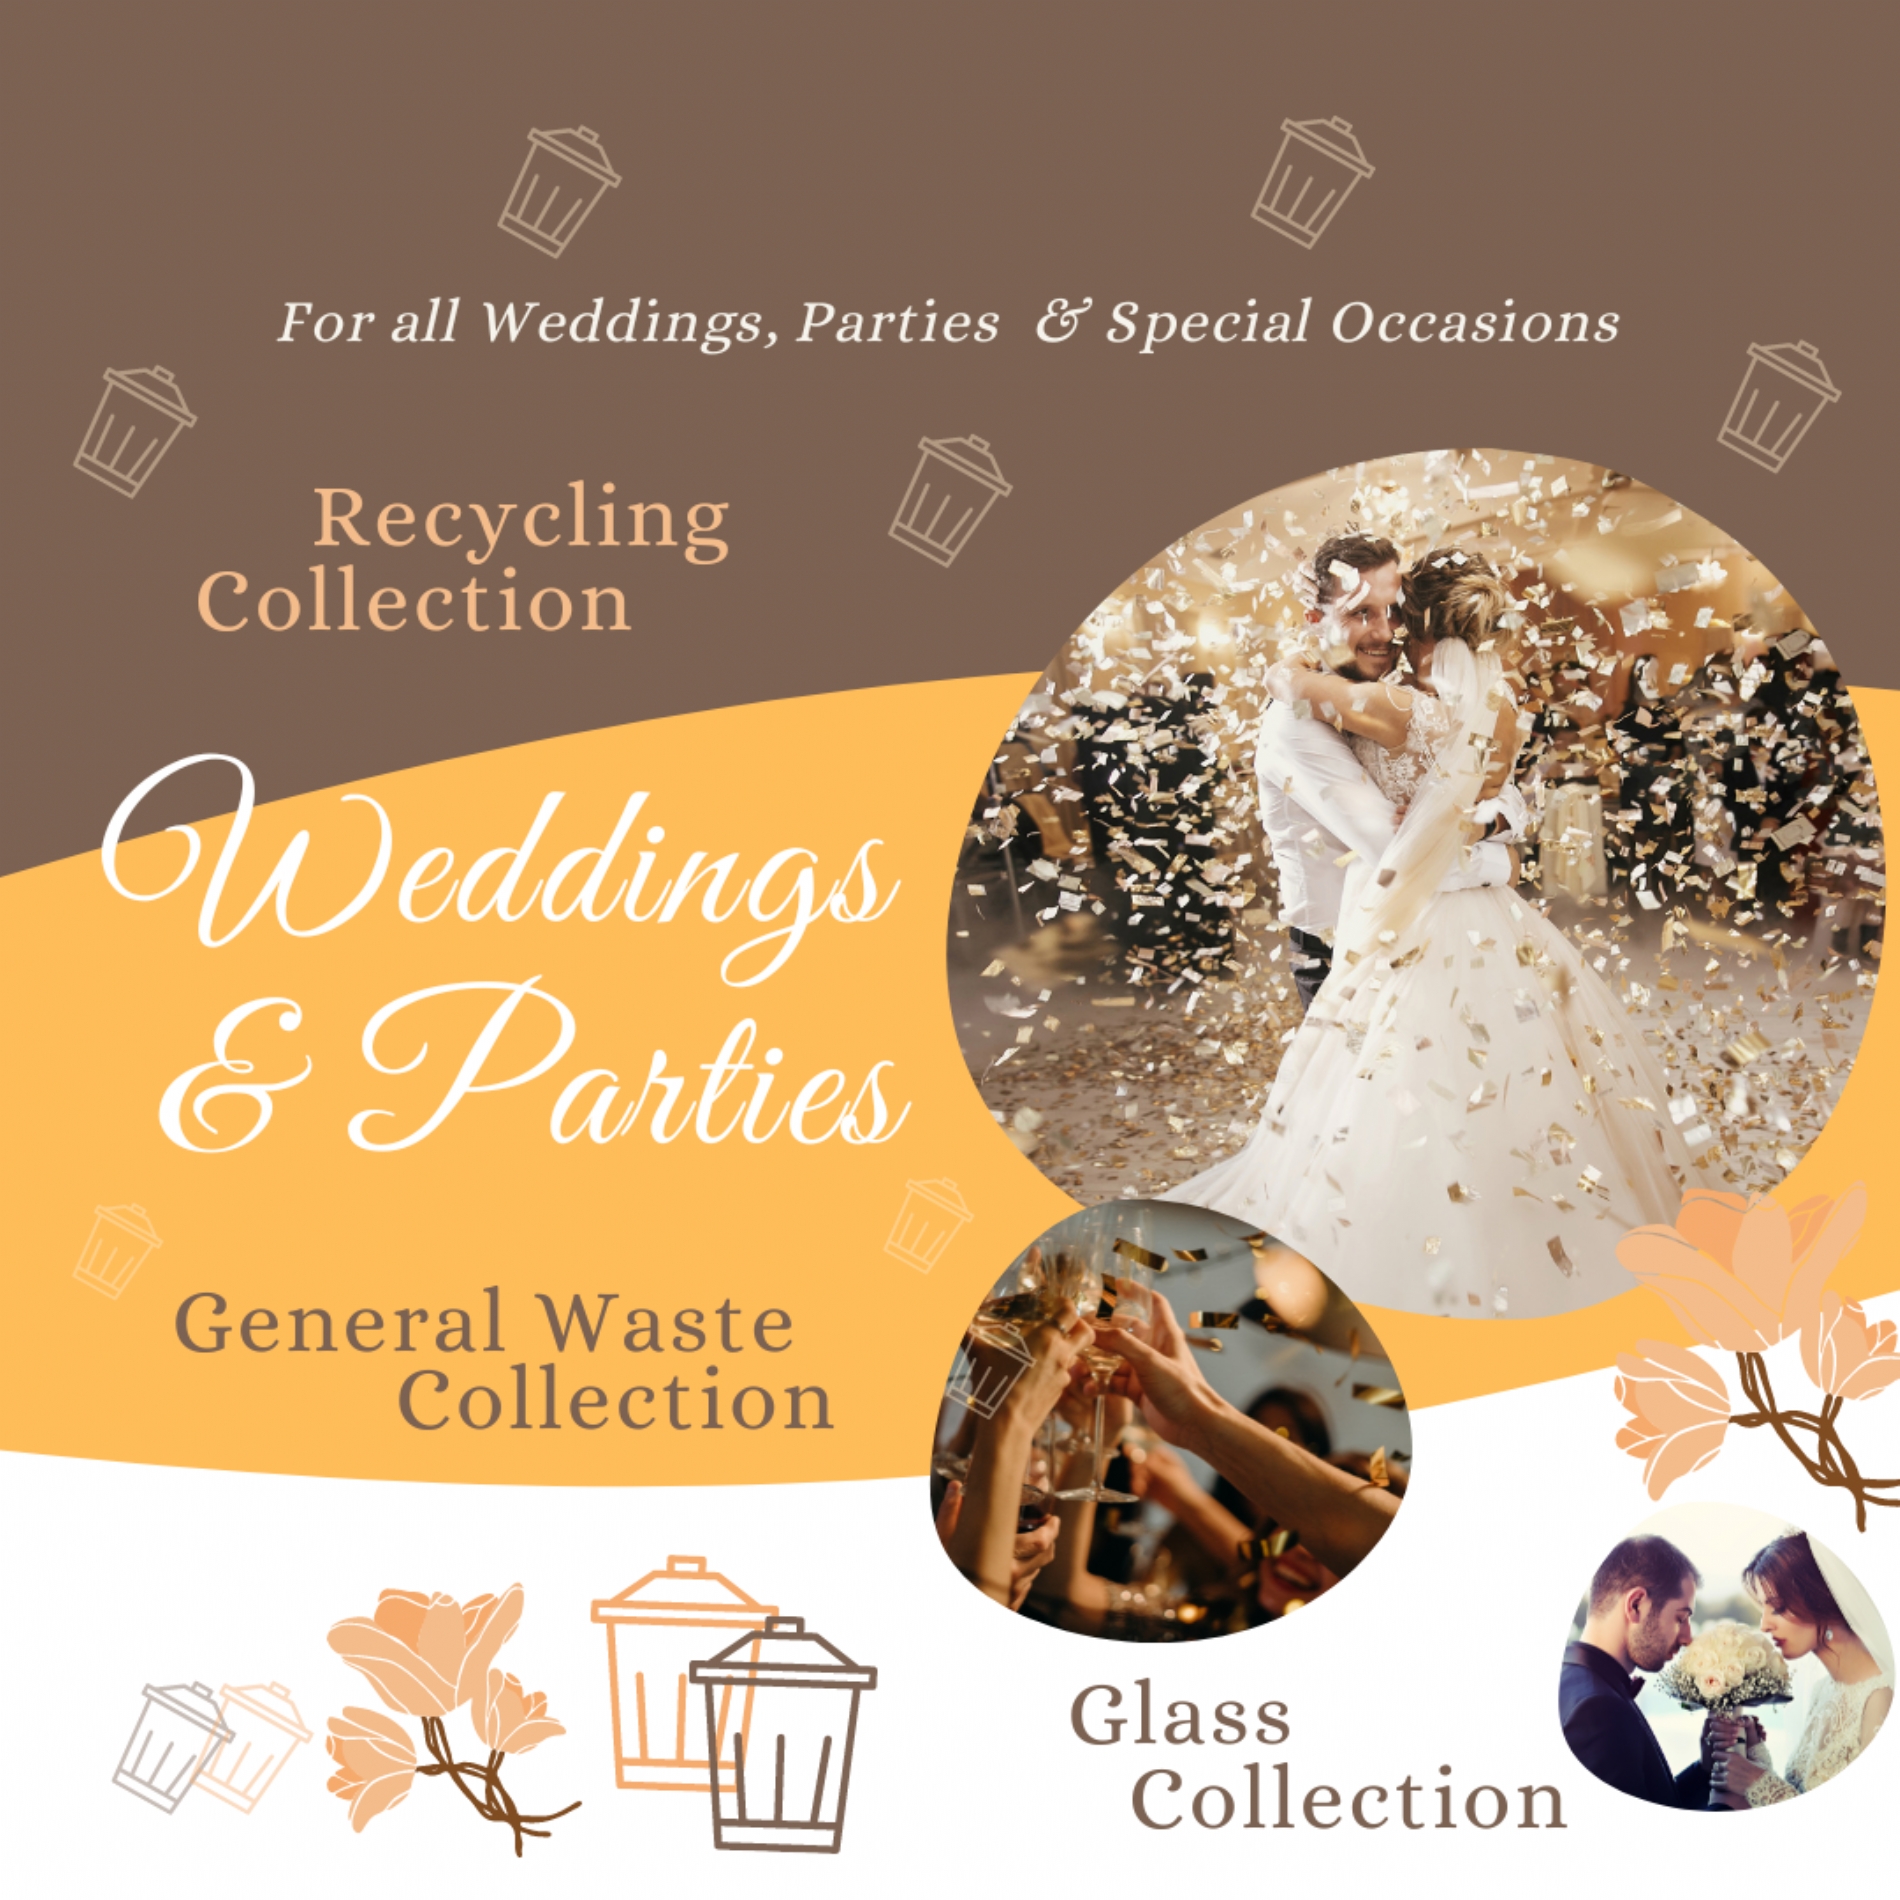 Wedding and Party Waste Collection